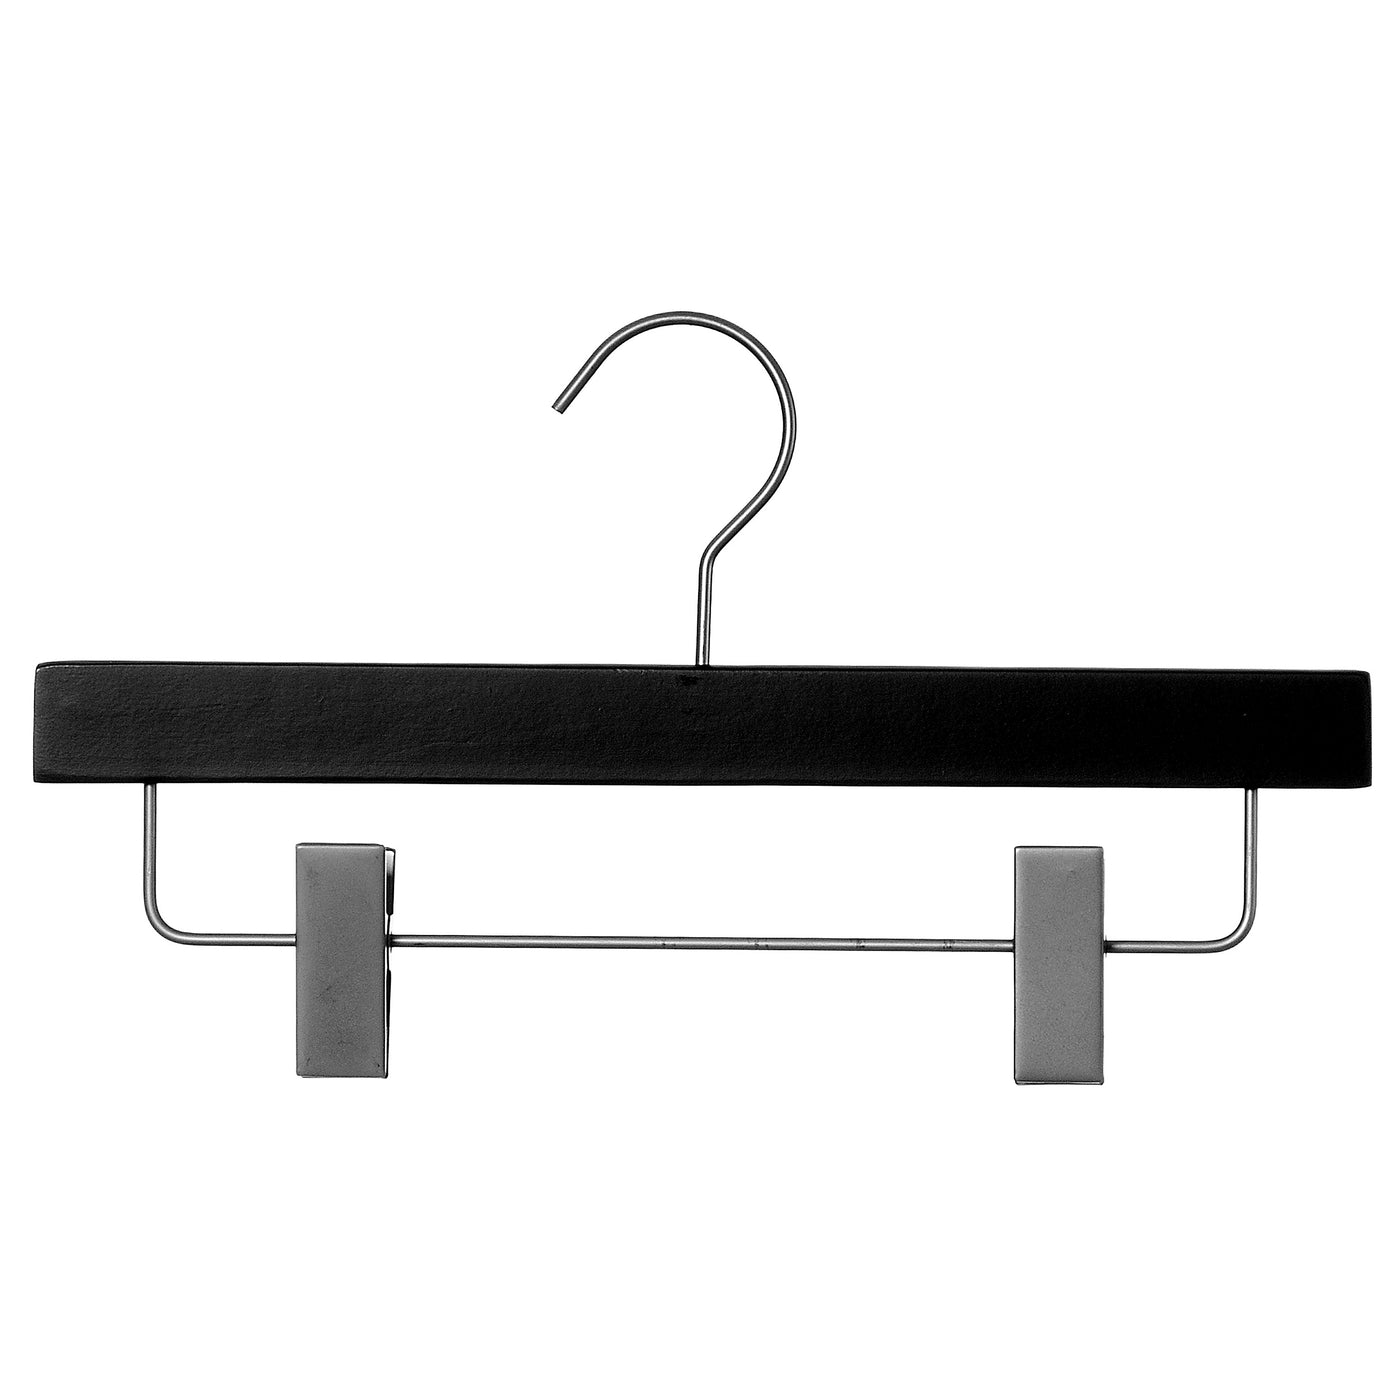 TOPIA HANGER Black Wooden Hangers, 0.28-inch Slim Wood Clothes Hanger with  Flat Design and Smooth Notches, Lightweight Space Saving Hangers for Shirt